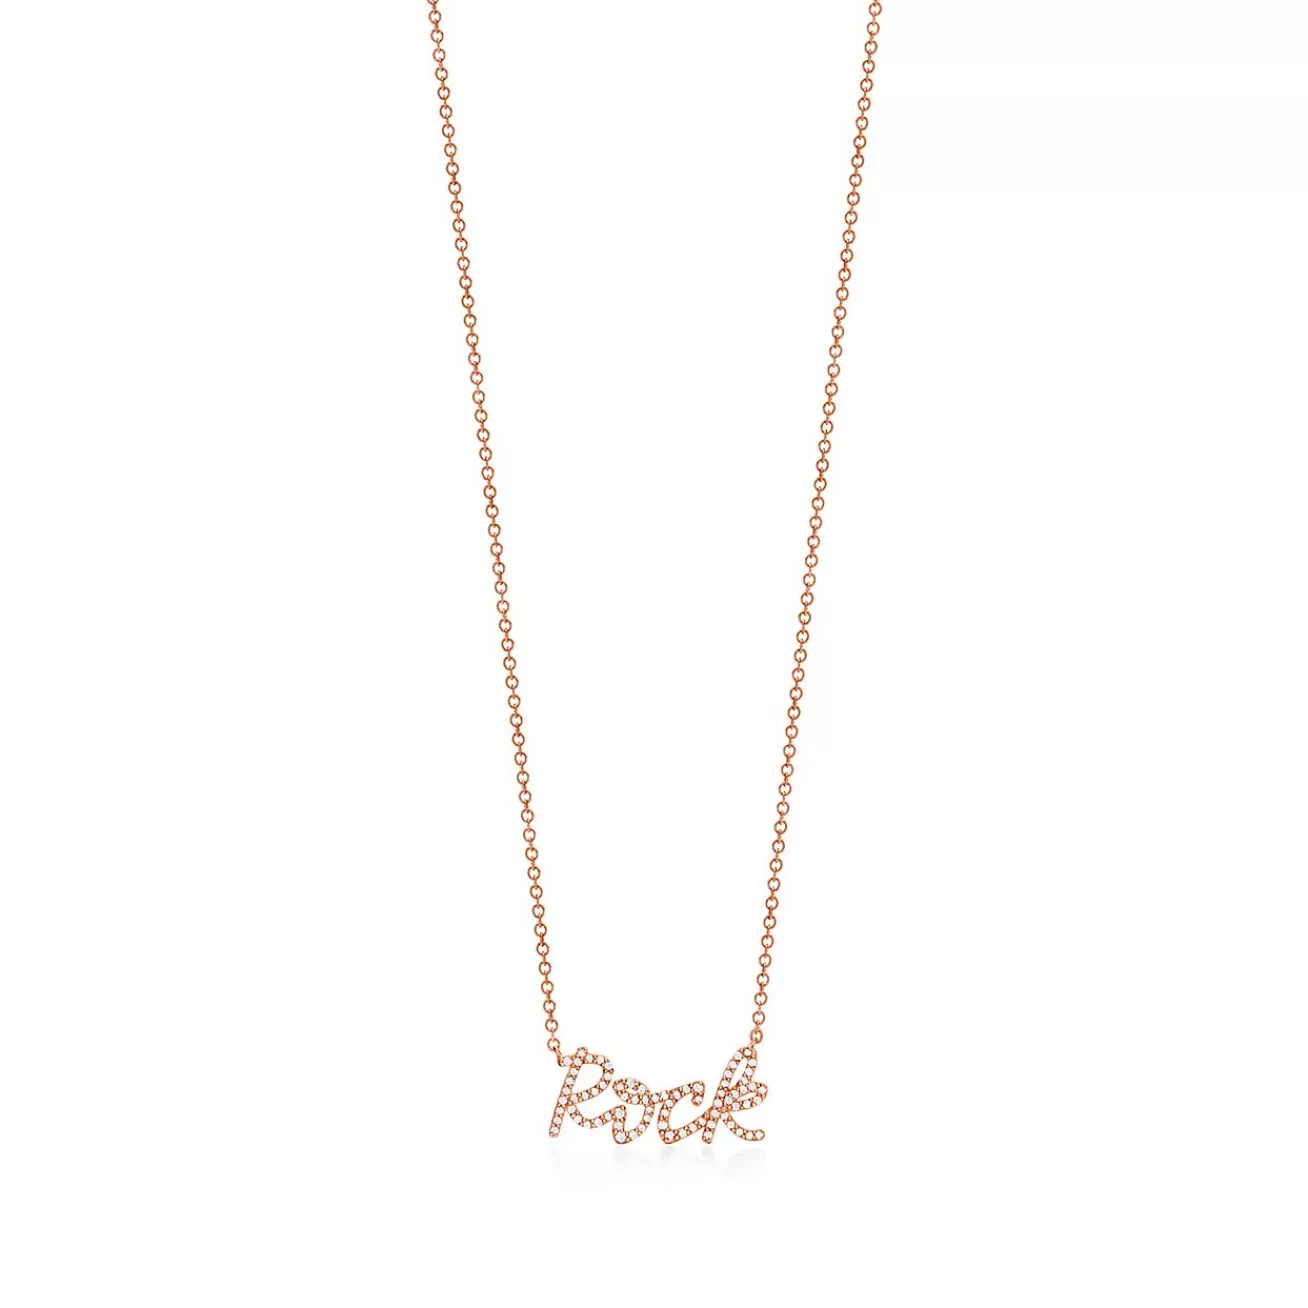 Tiffany & Co. Paloma's Graffiti rock pendant in 18k rose gold with diamonds. | ^ Necklaces & Pendants | Rose Gold Jewelry